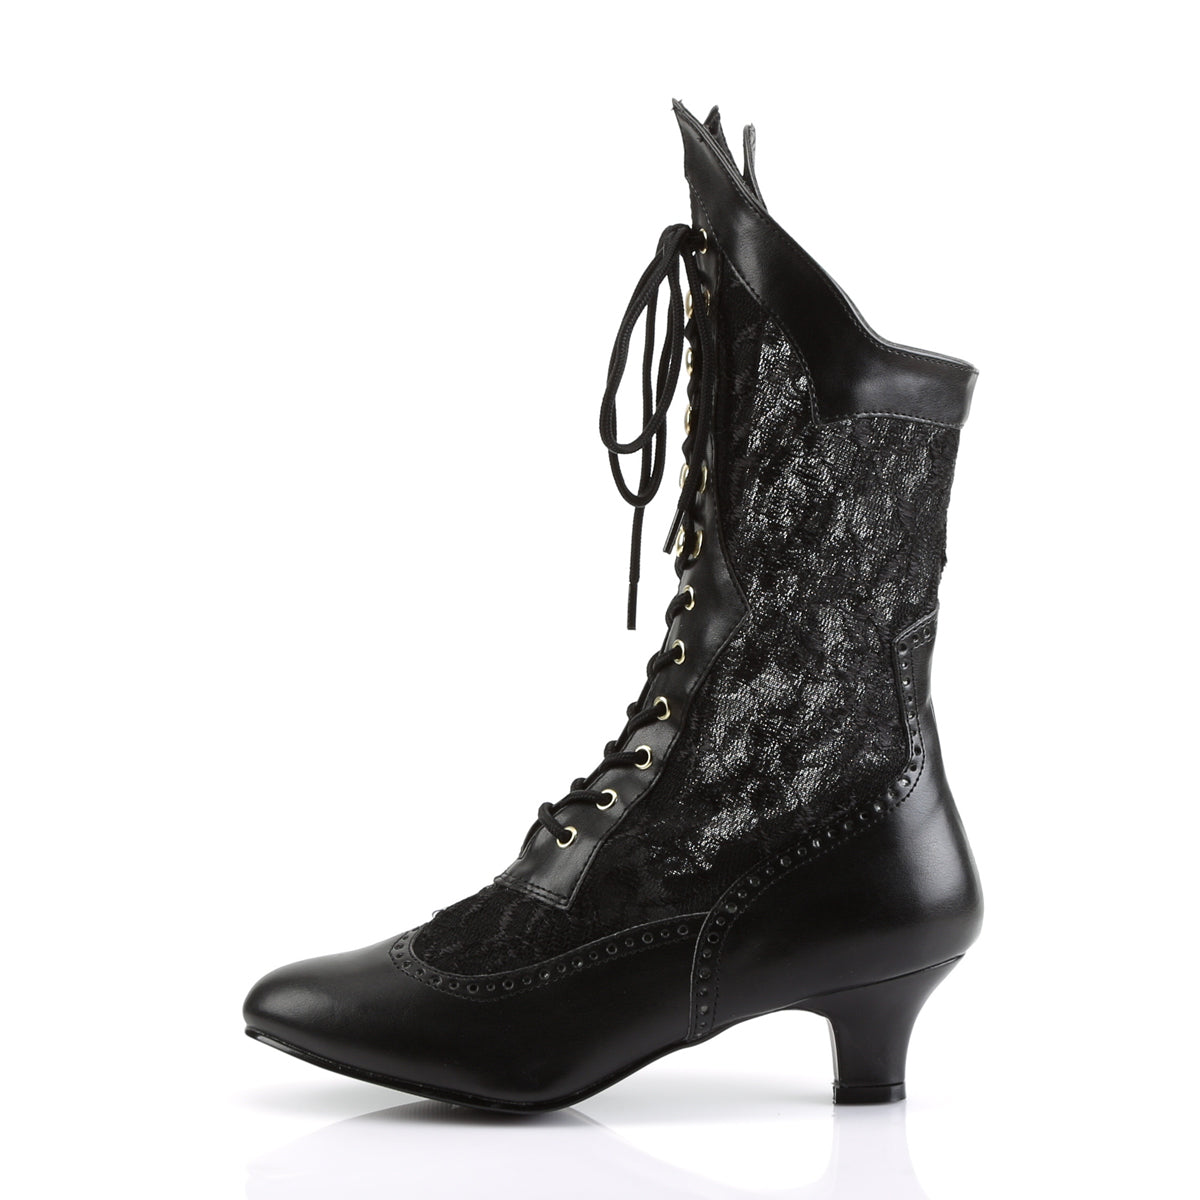 Funtasma Womens Ankle Boots DAME-115 Blk Pu-Lace